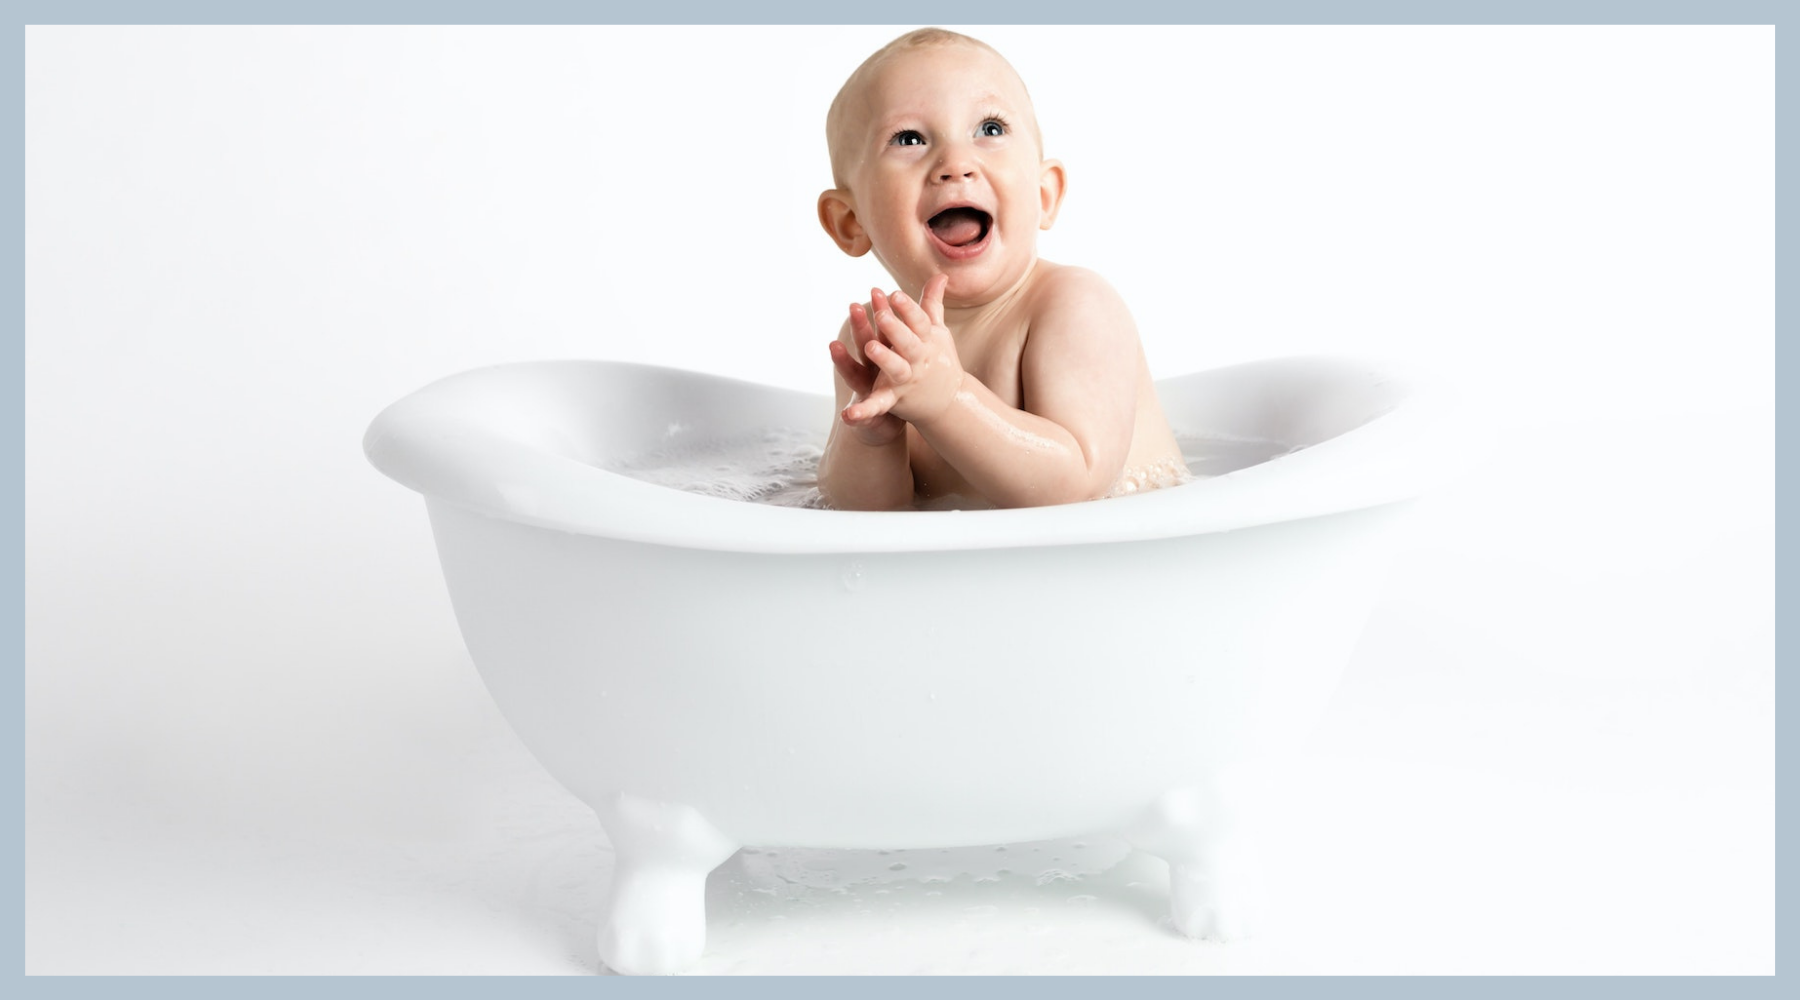 how often should you bath your kids? not as often as you might think